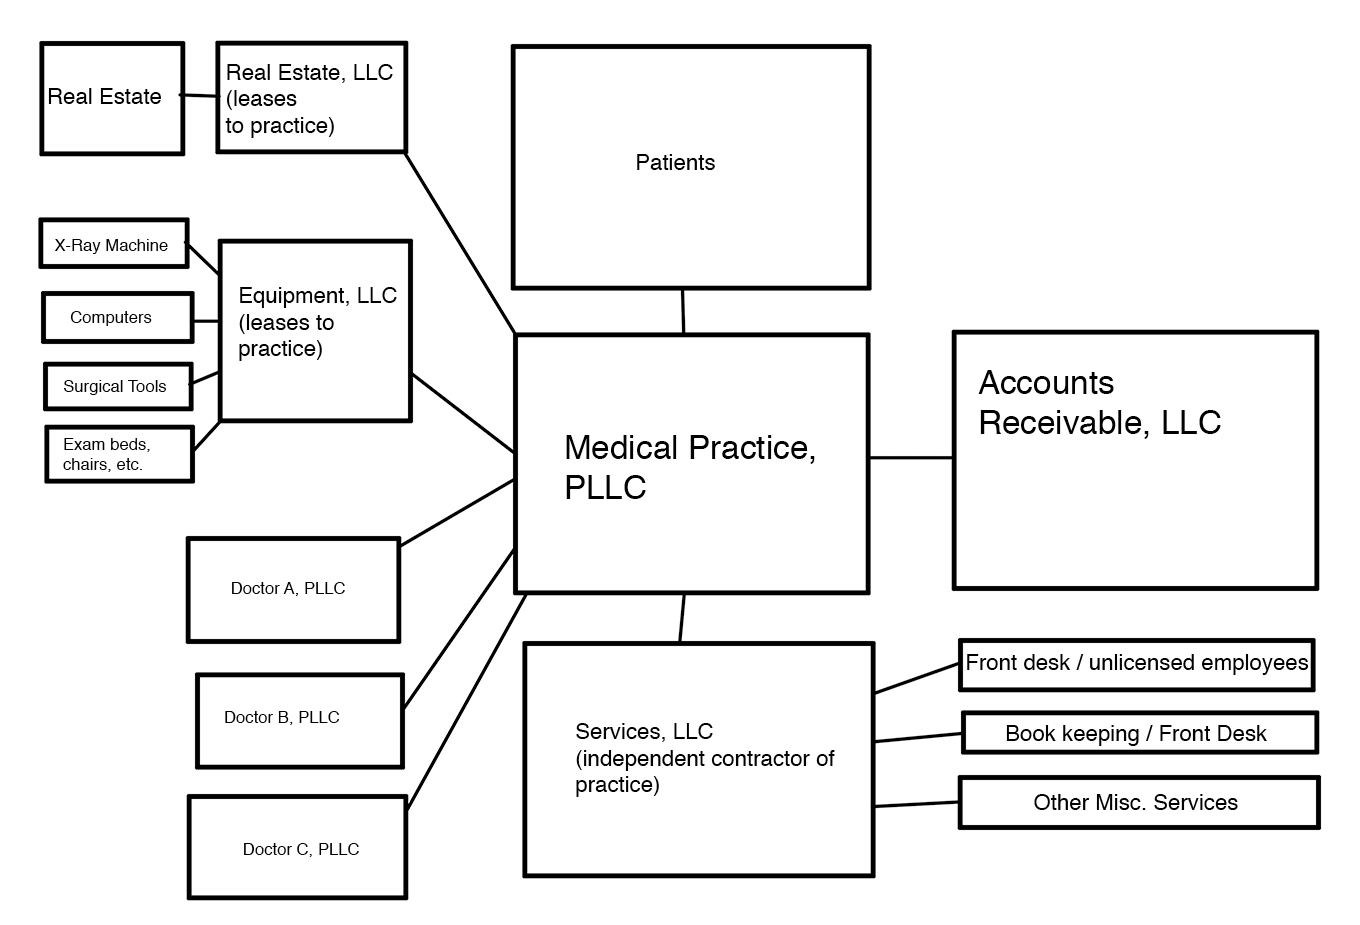 a diagram of a modular surgical practice, with various separate LLCs to help separate out the various activities such as a real estate LLC to own real estate and lease back to practice, an equipment LLC to do the same, each Doctor in the practice has a separate PLLC for each doctor, that then owns part of the Practice PLLC, a services LLC as an independent contractor of the practice to hire the non-licensed staff, and an accounts receivable LLC